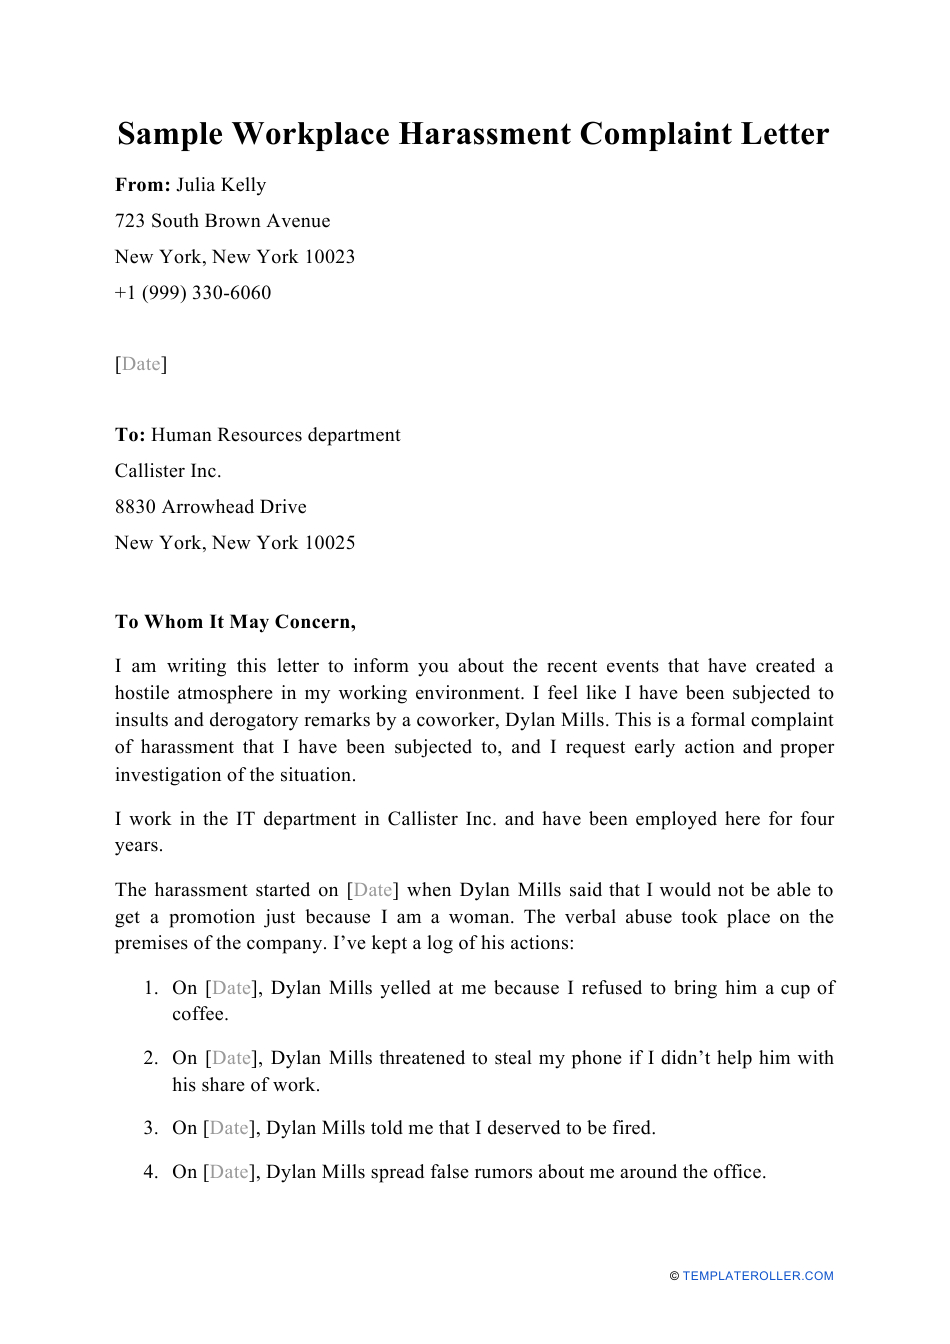 Sample Workplace Harassment Complaint Letter Download in Grievance Template Letters